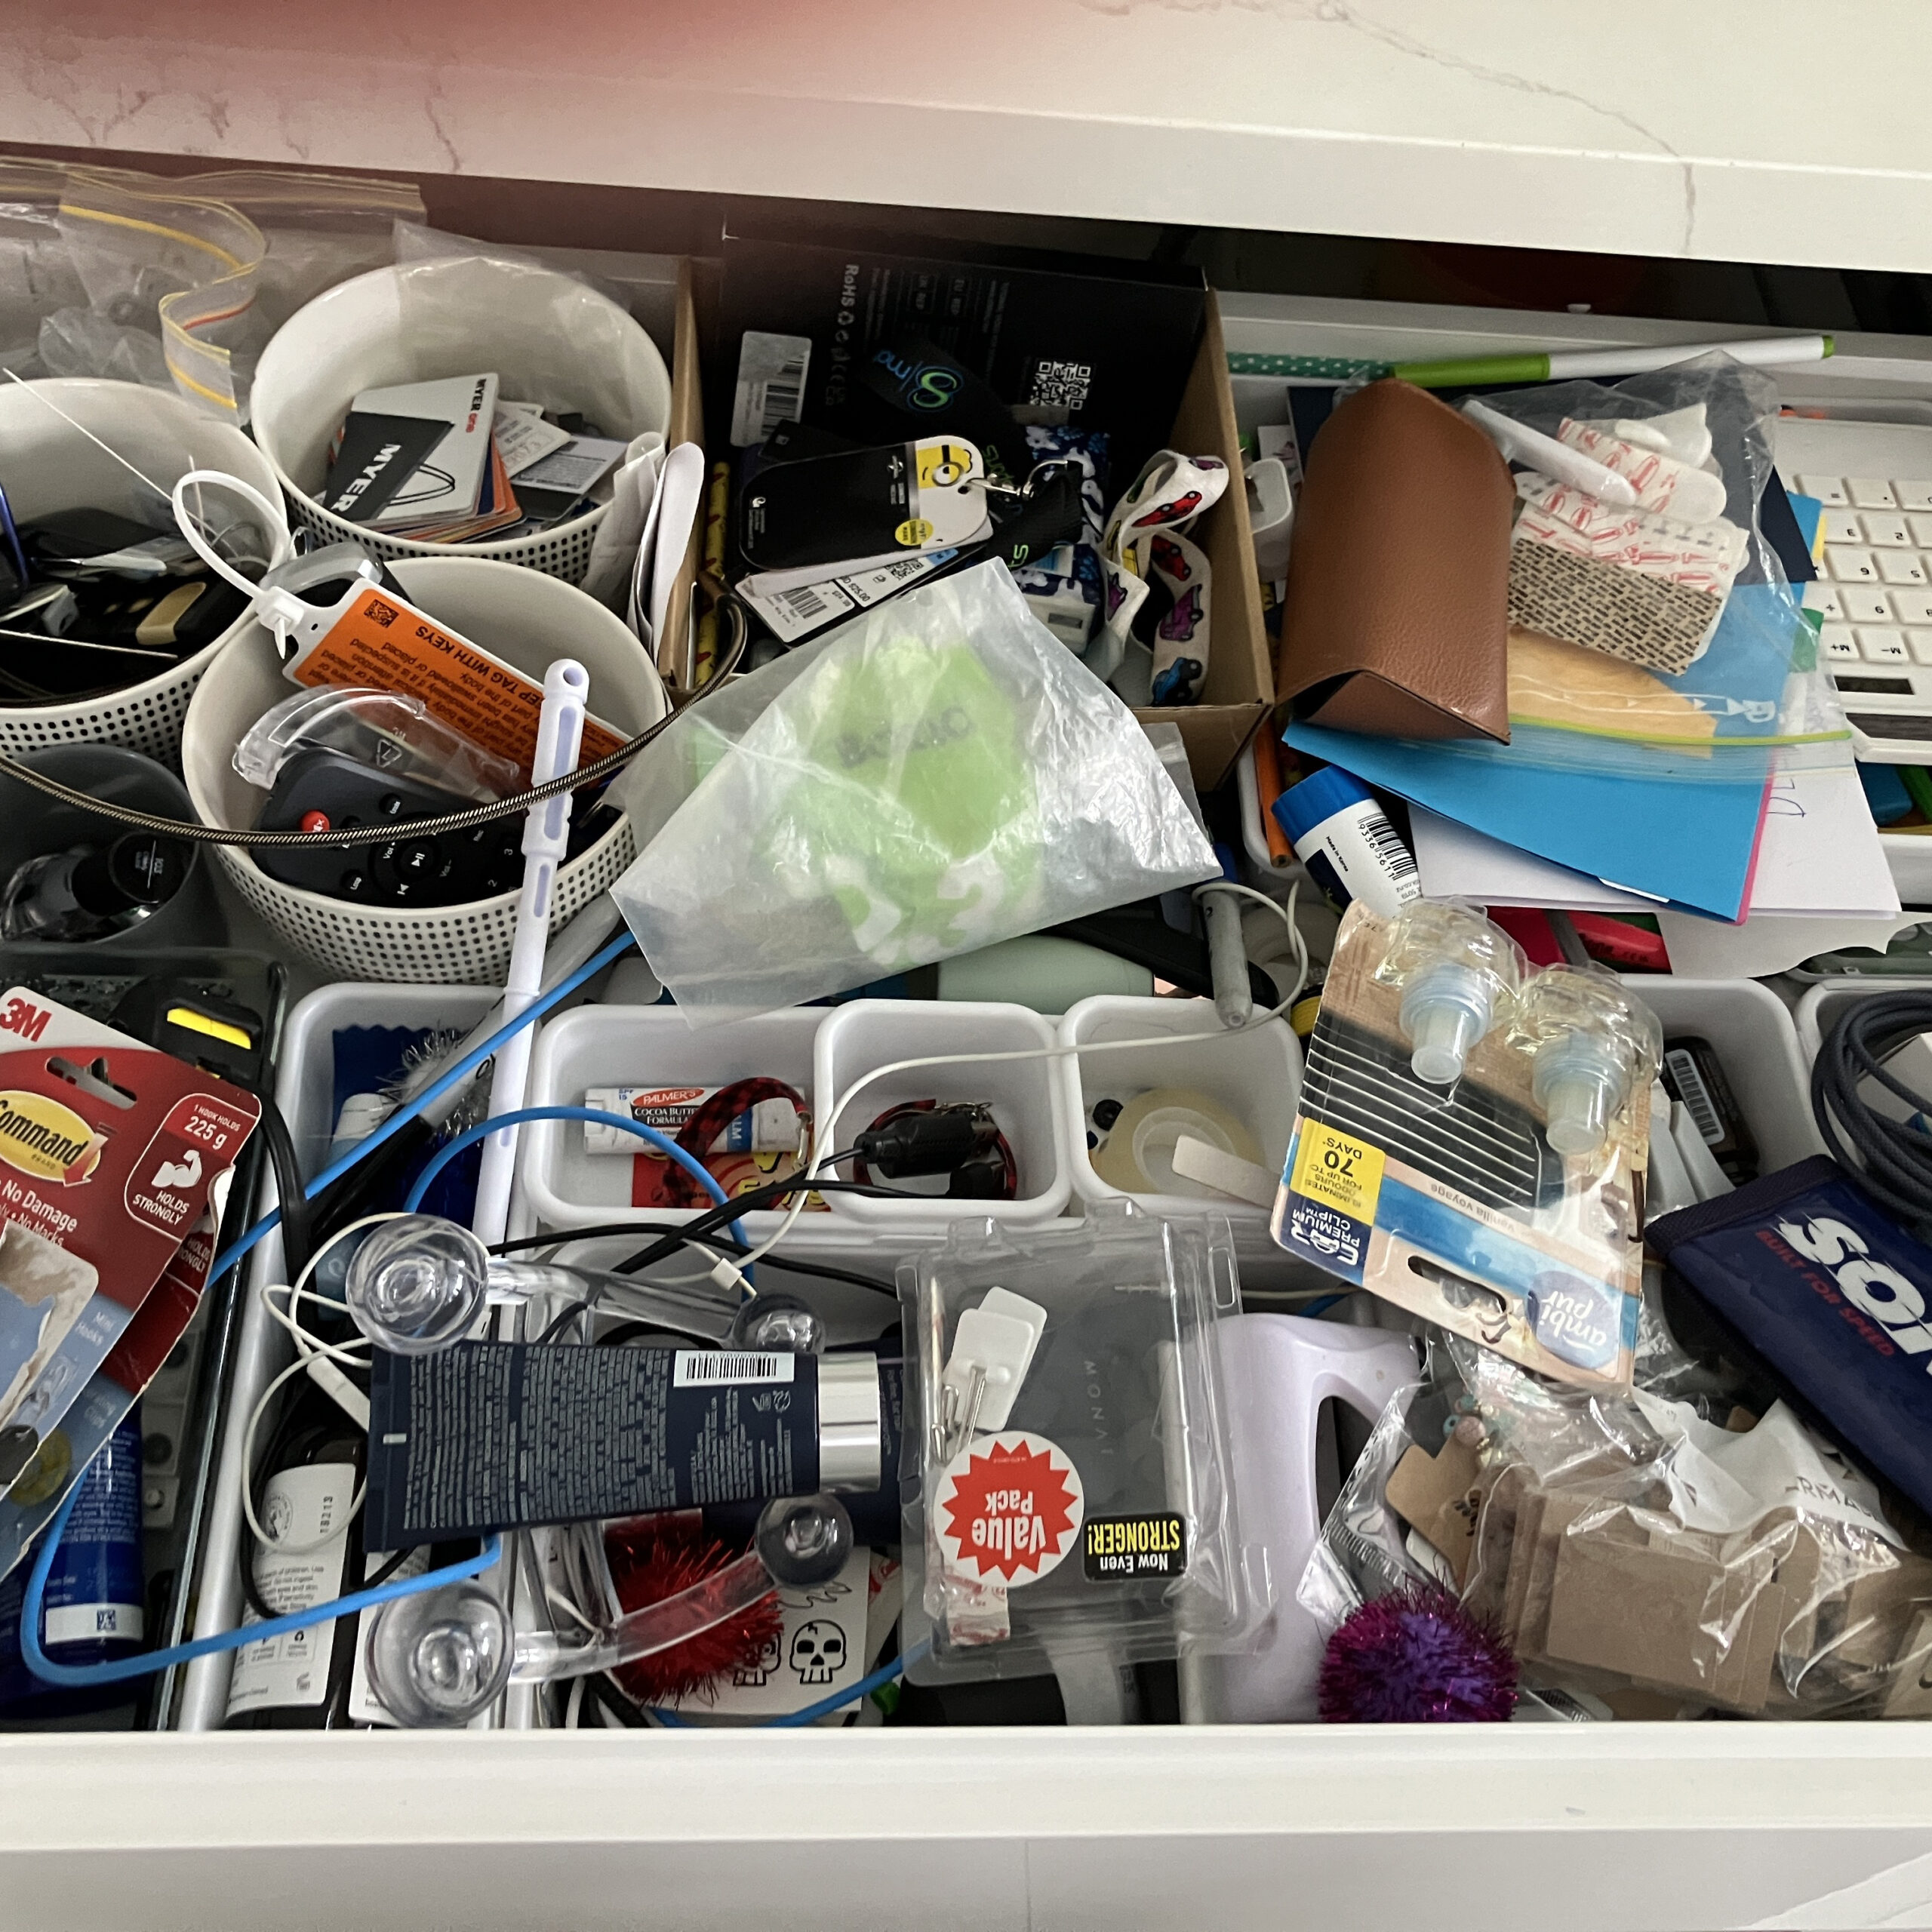 Messy and cluttered kitchen drawer